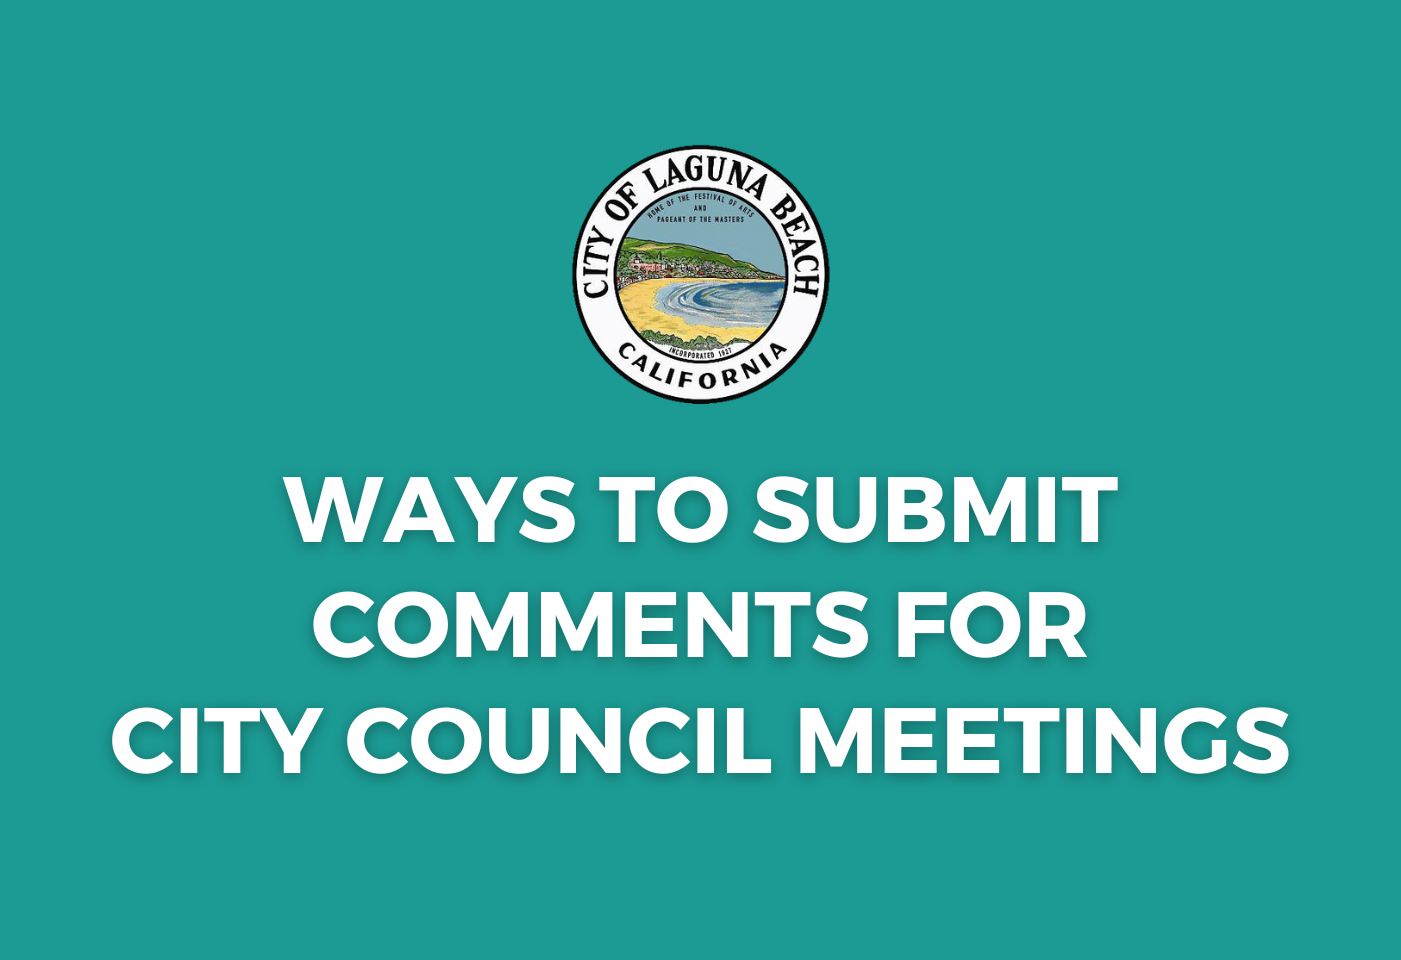 Ways to Submit Comments for City Council Meetings